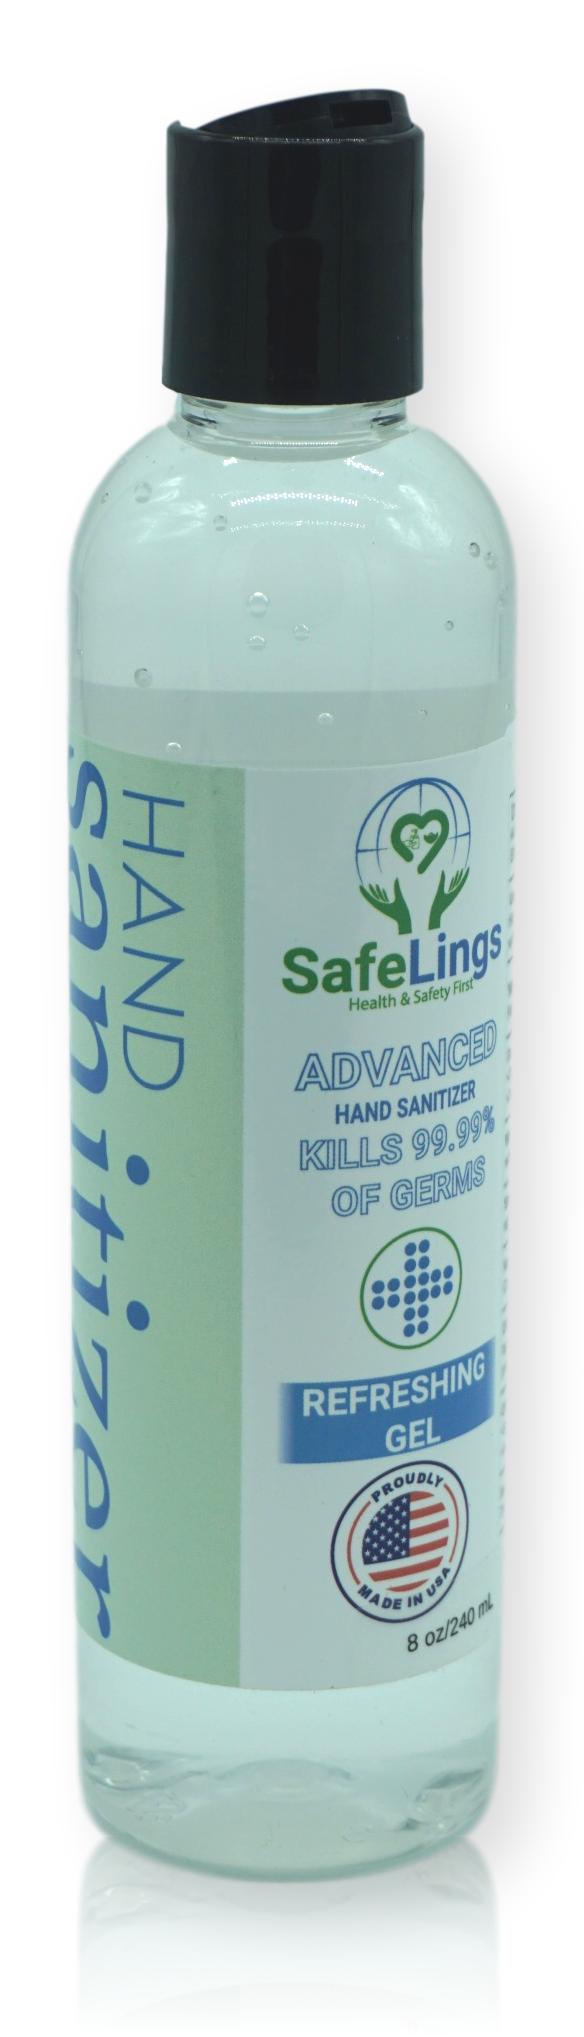 GEL Hand Sanitizer - Alcohol 70% - Made in USA 8 OZ